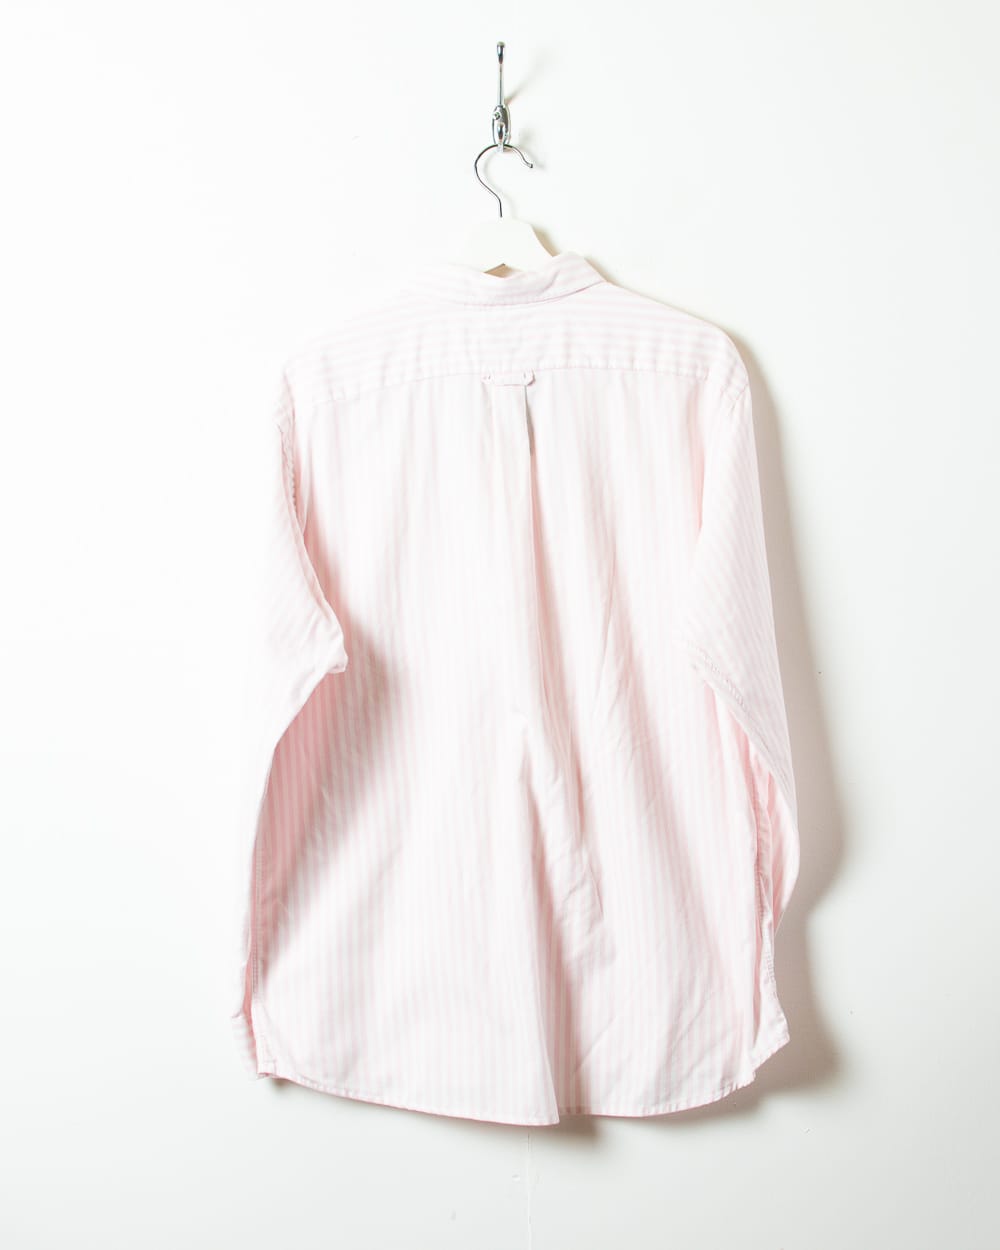 Pink Chemise Lacoste Striped Shirt - Large